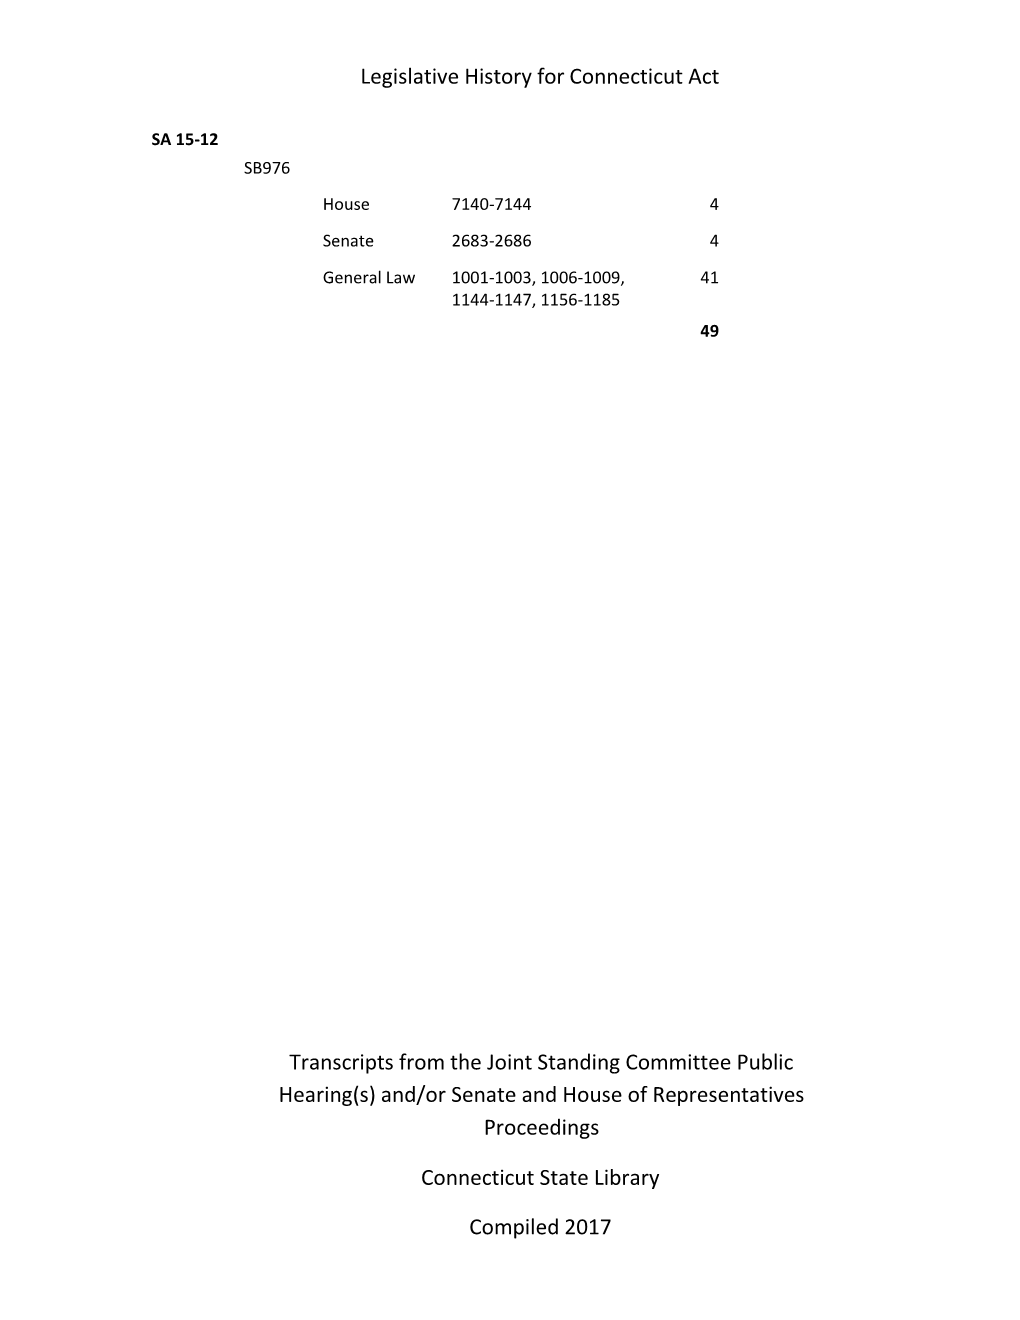 Legislative History for Connecticut Act Transcripts from the Joint Standing